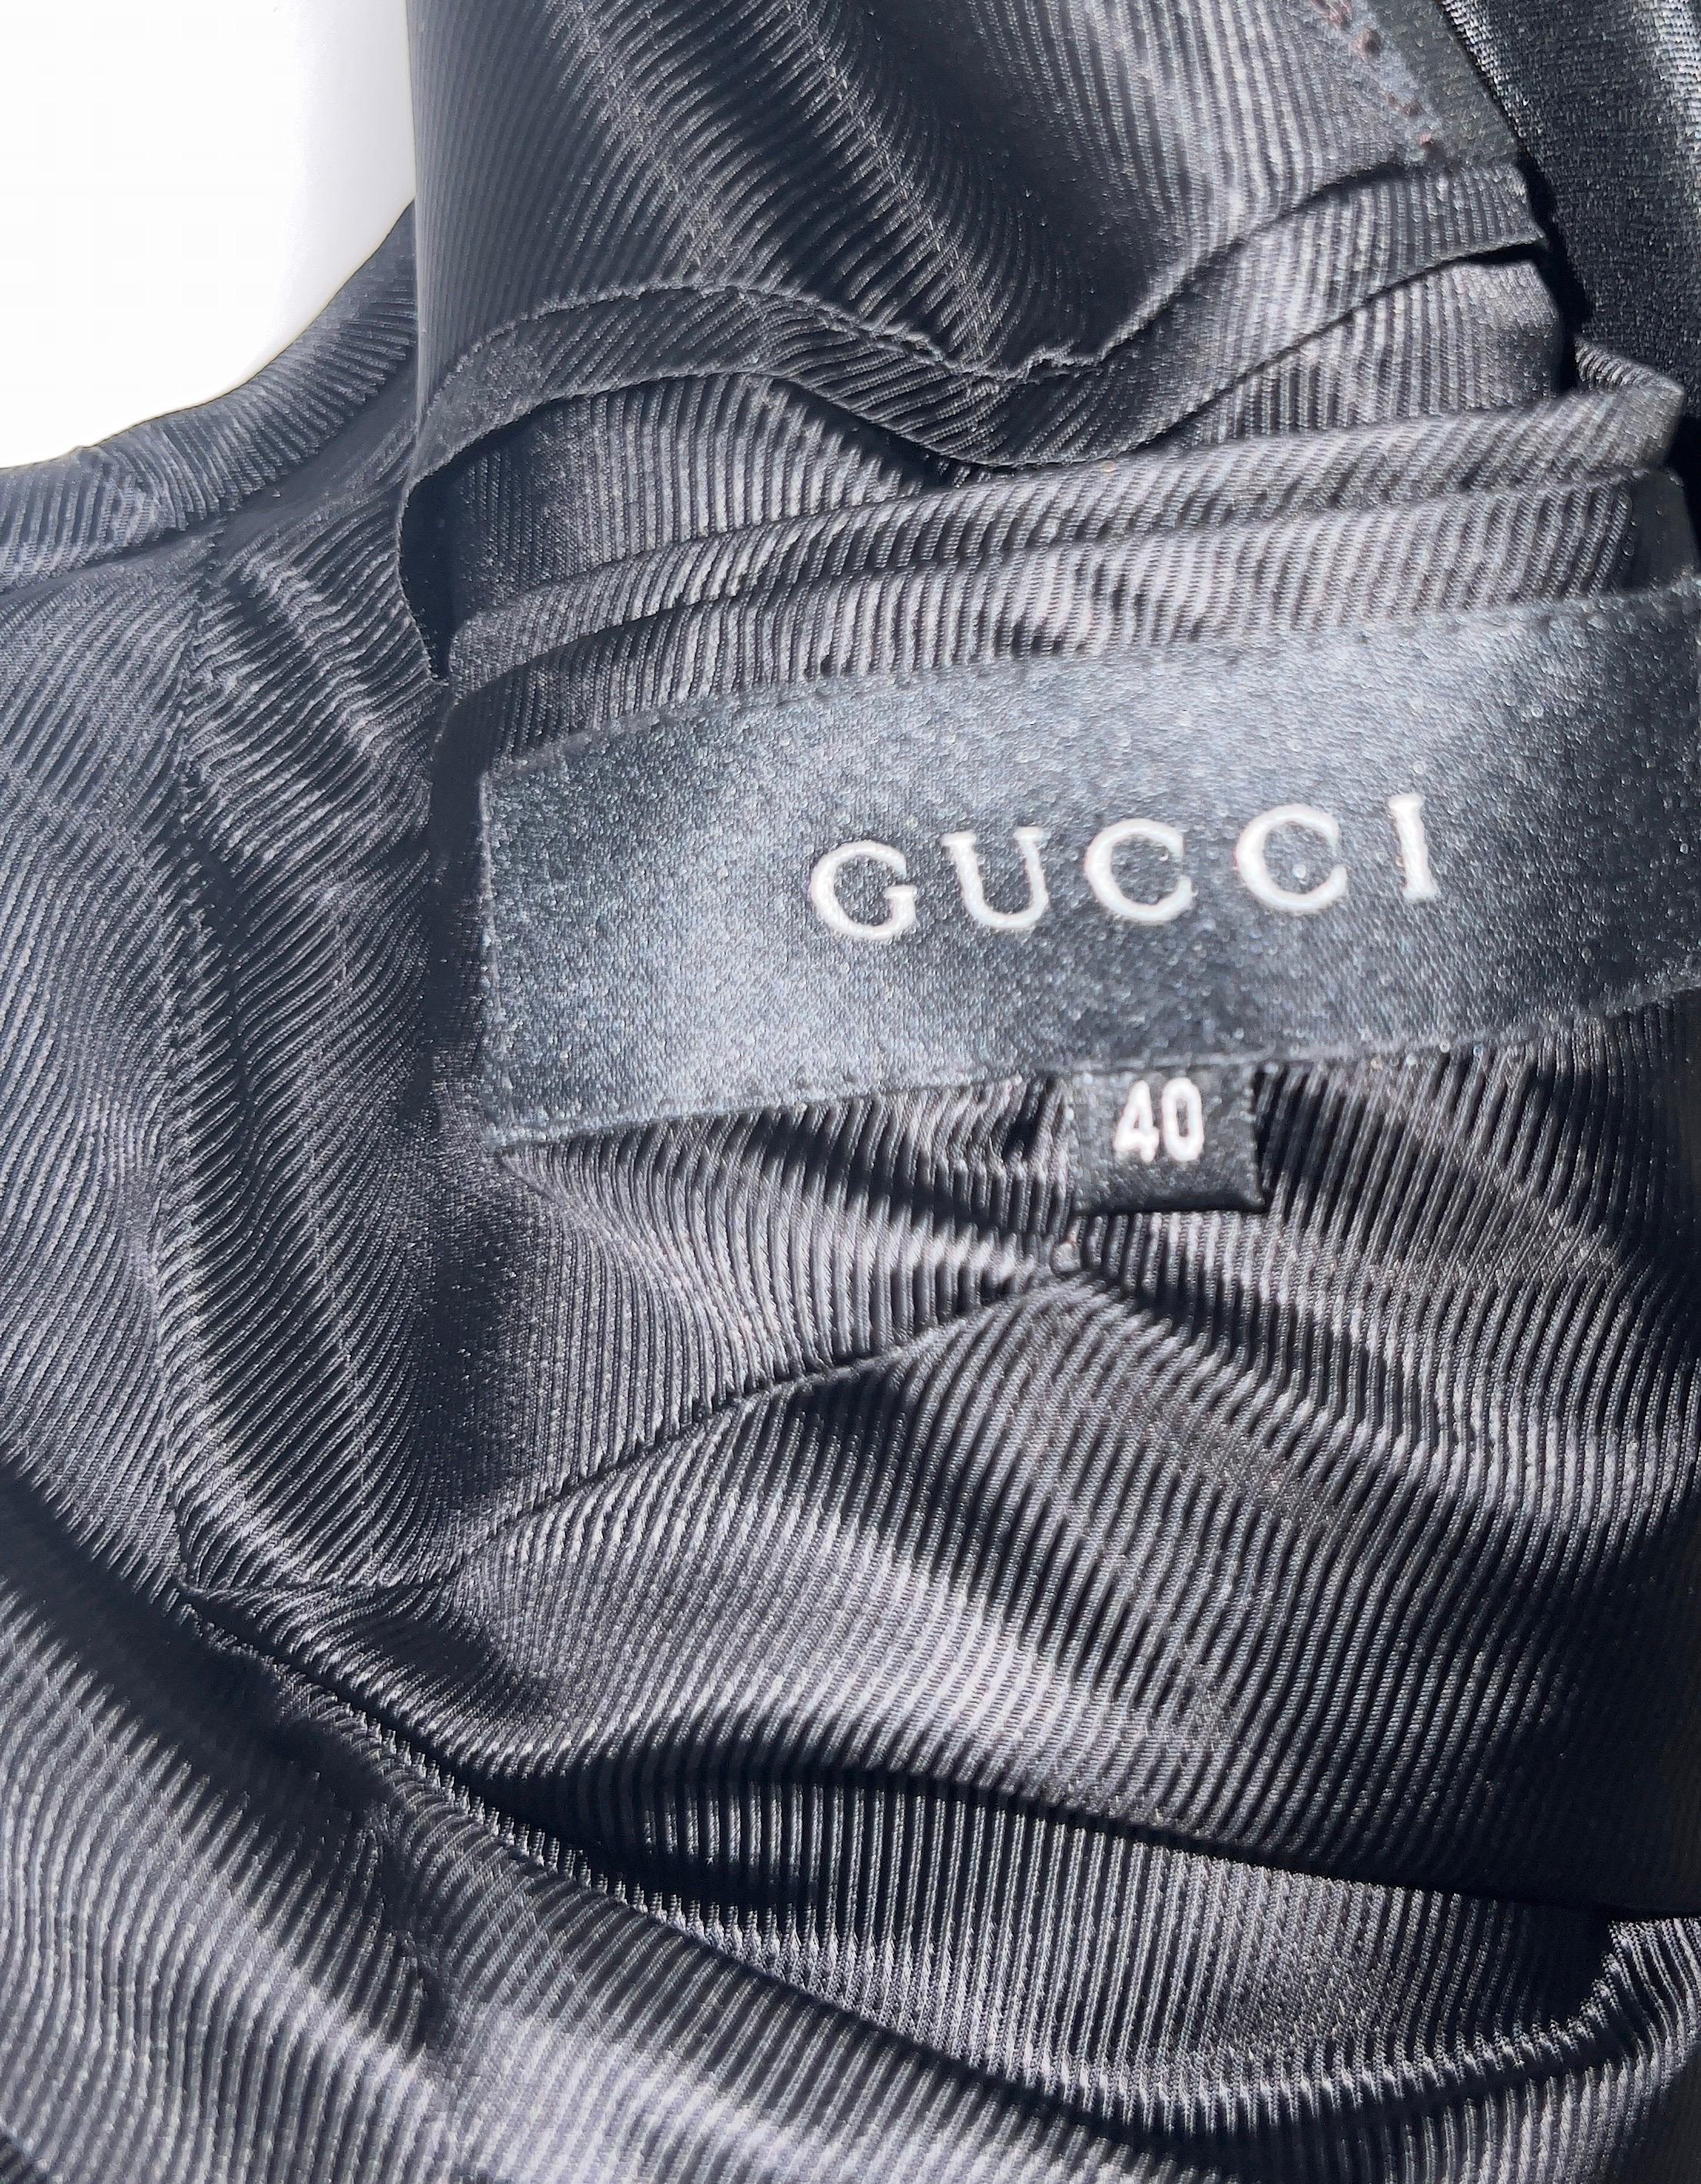 Gucci by Tom Ford Y2K - Veste portefeuille noire, style smoking, non portée, taille 40 2